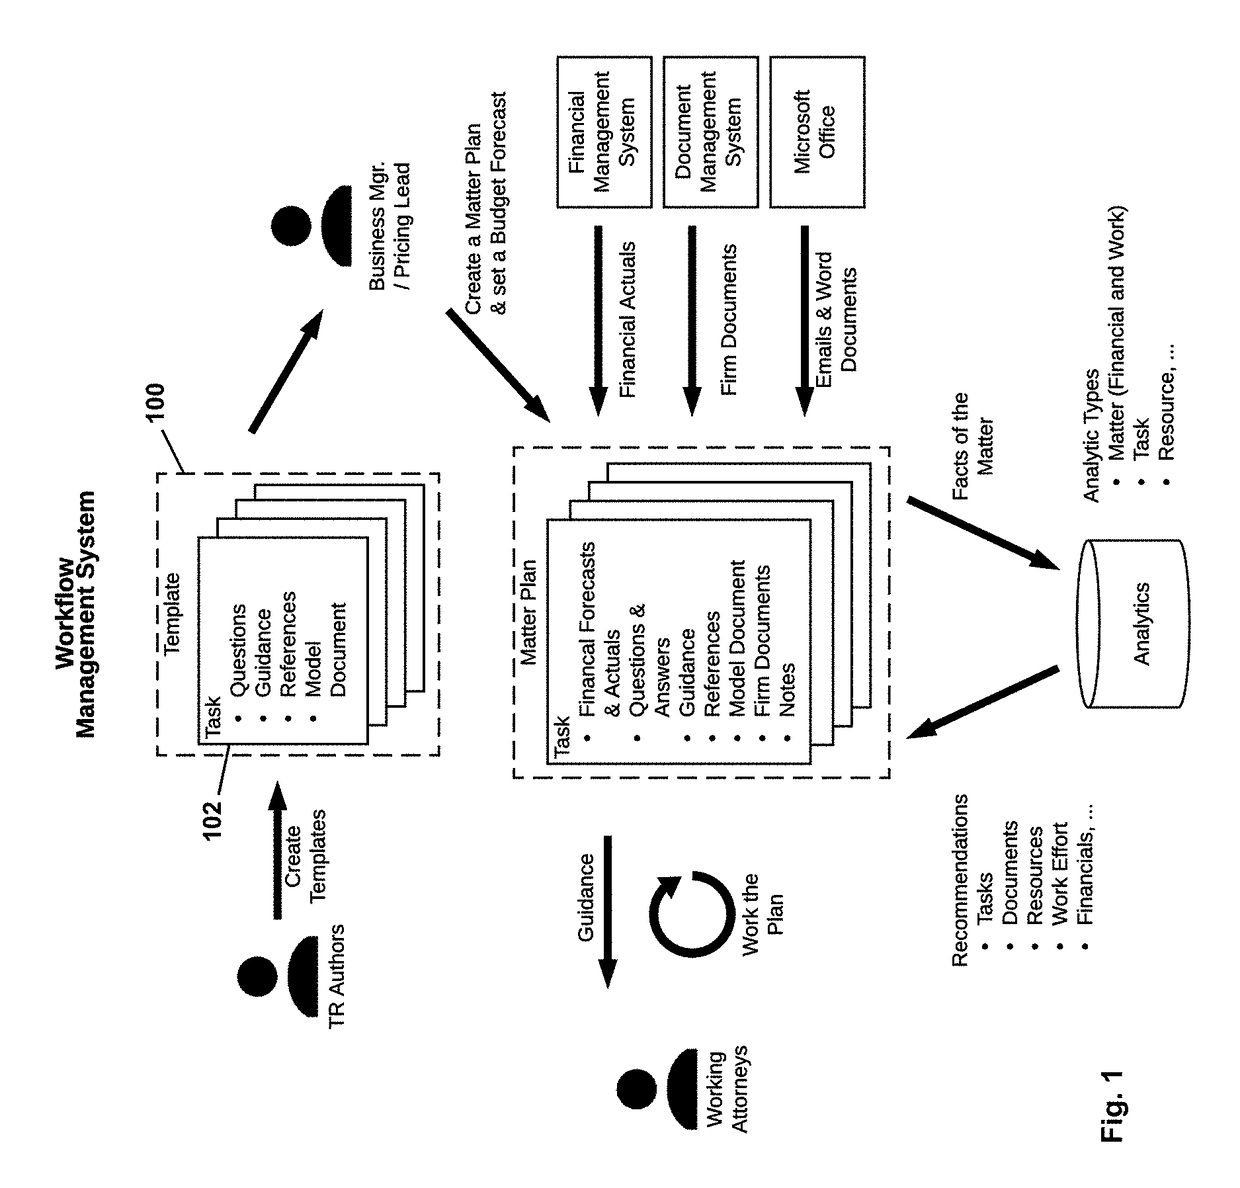 Systems and methods for workflow and practice management